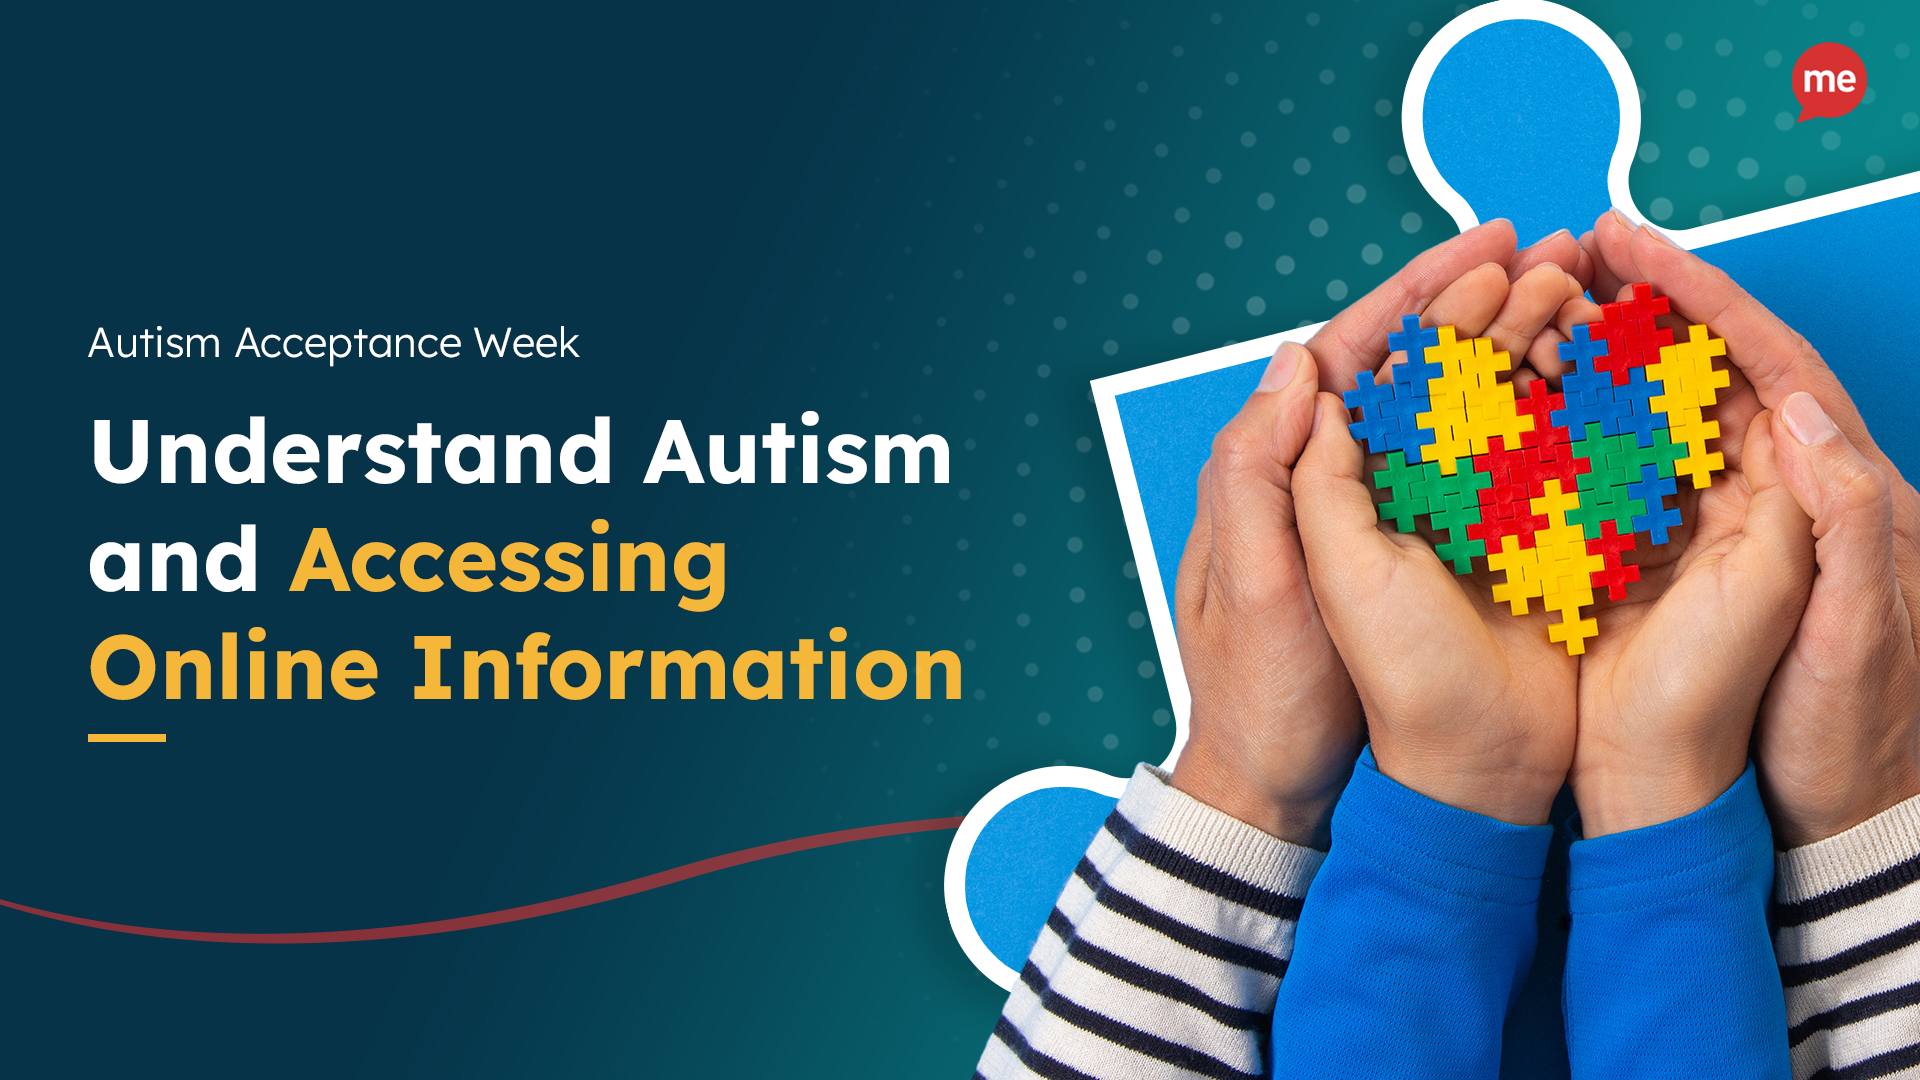 Understand autism and accessing online information with an image of 3 hands holding multicolored legos forming a heart.